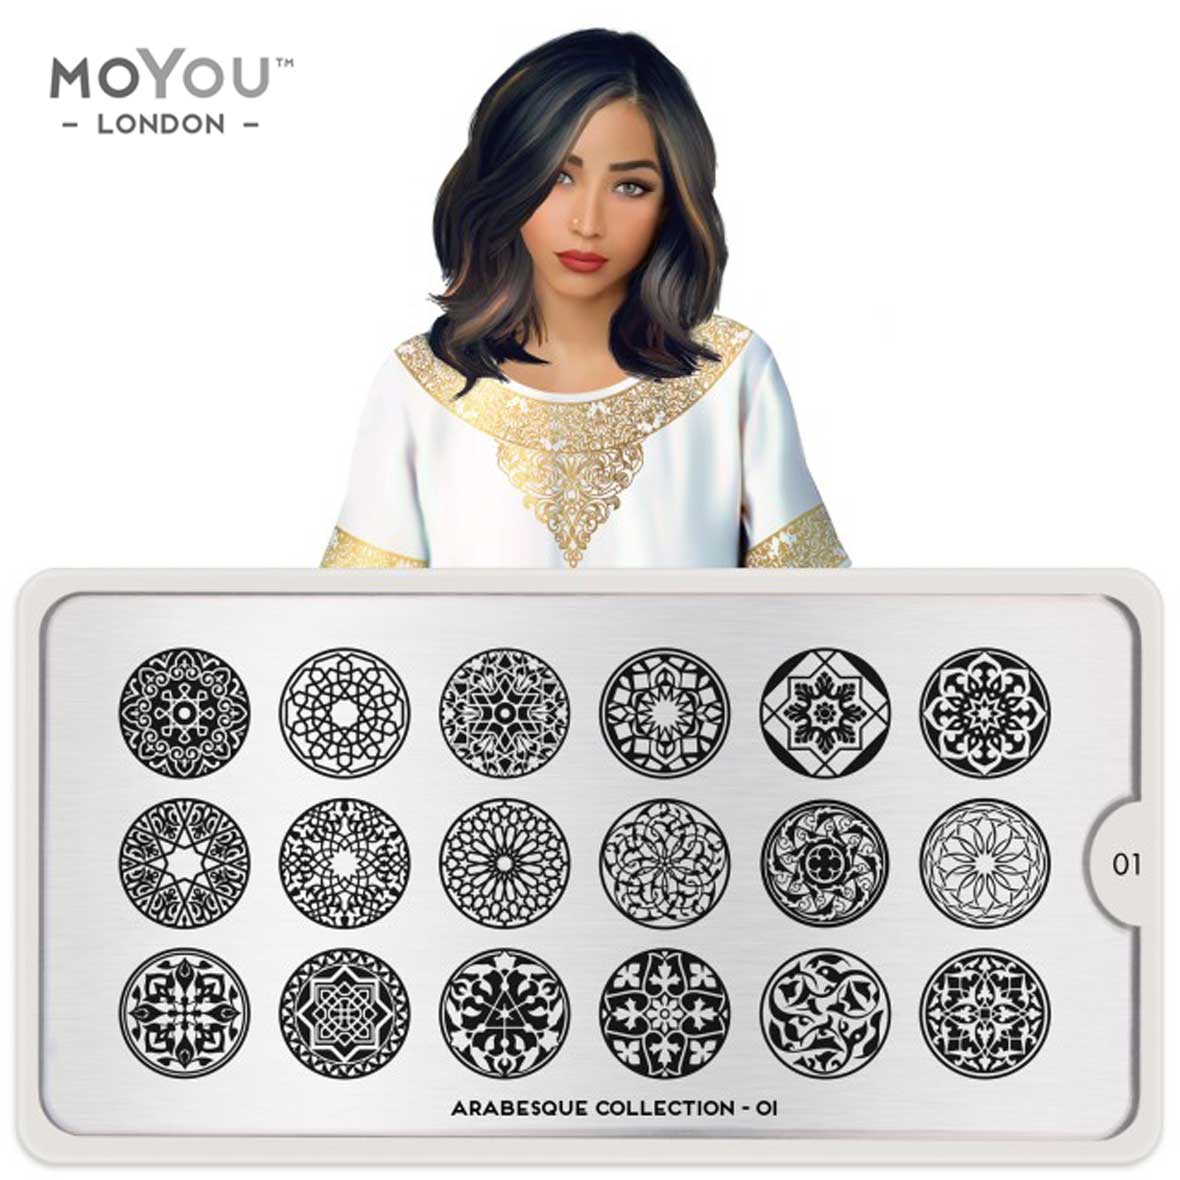 MoYou Stamping Plate Arabesque 01